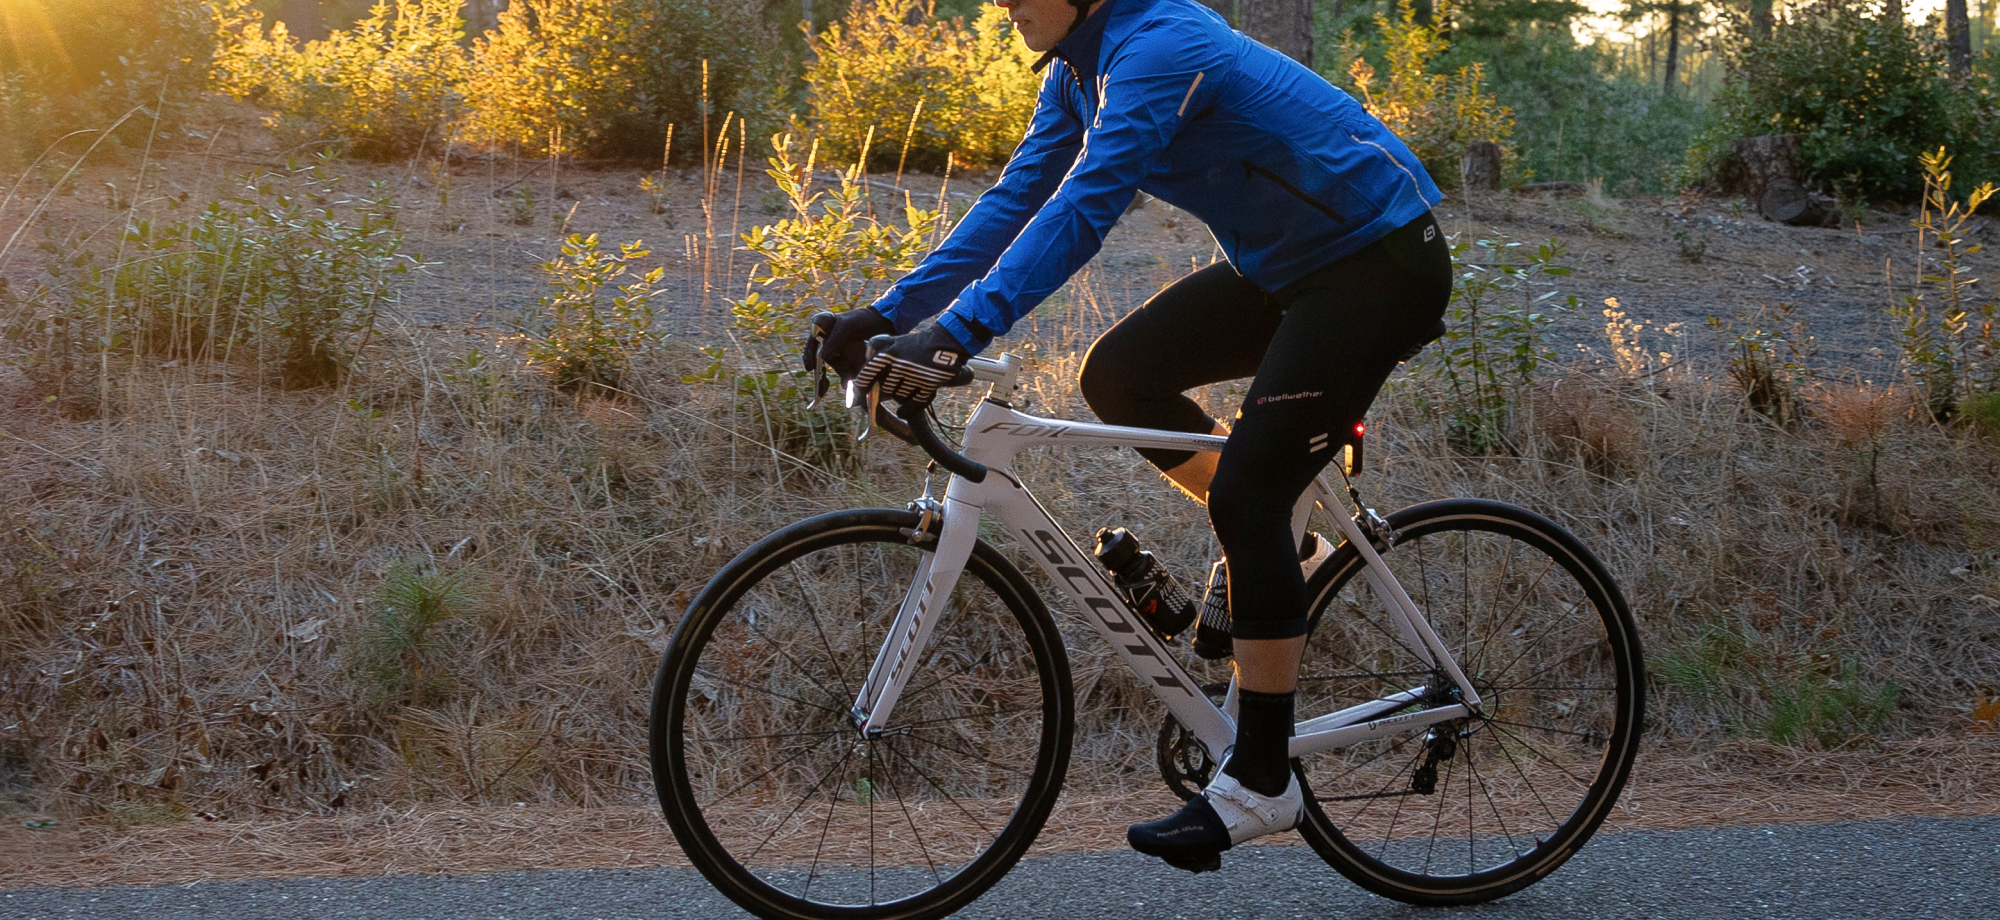 Staff Favorites: Winter Layering - cyclists on road in cold weather clothing